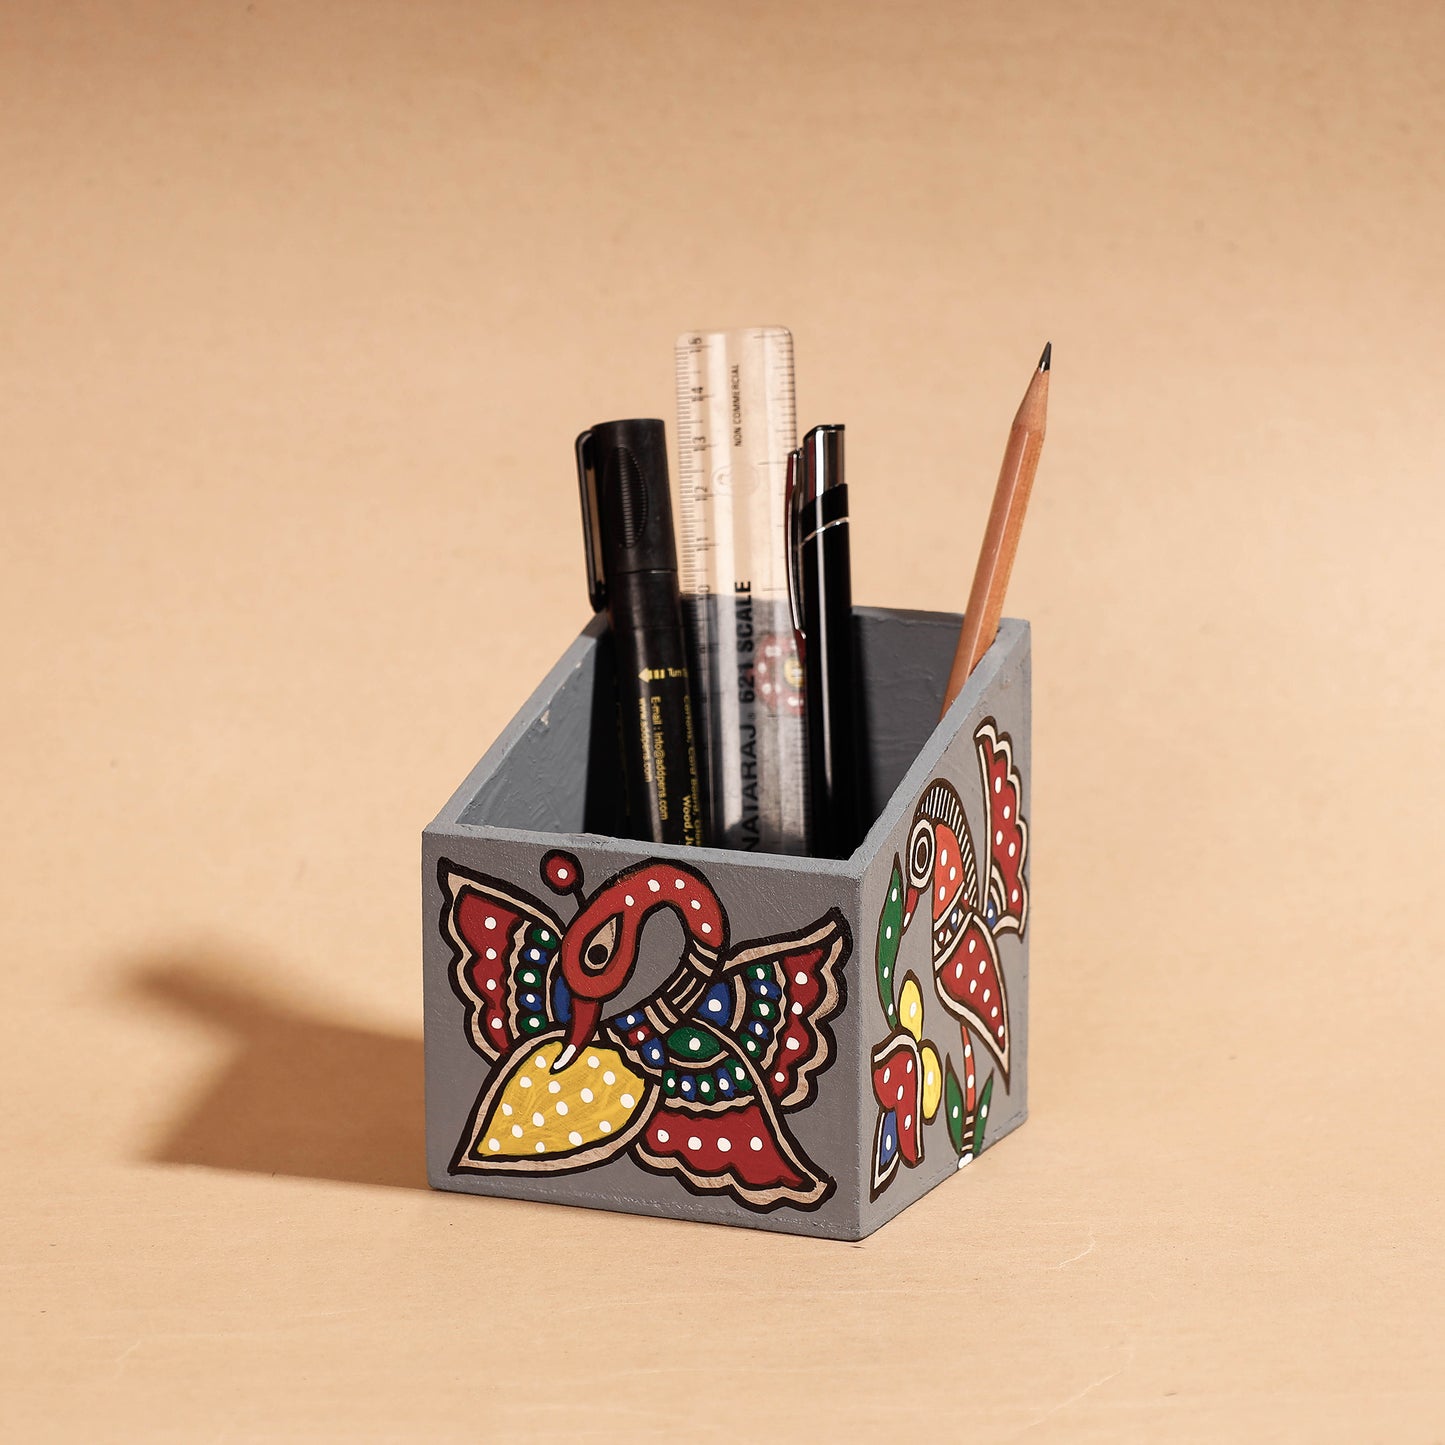 Madhubani Handpainted Wooden Pen Stand (3.5 x 3.5 in)